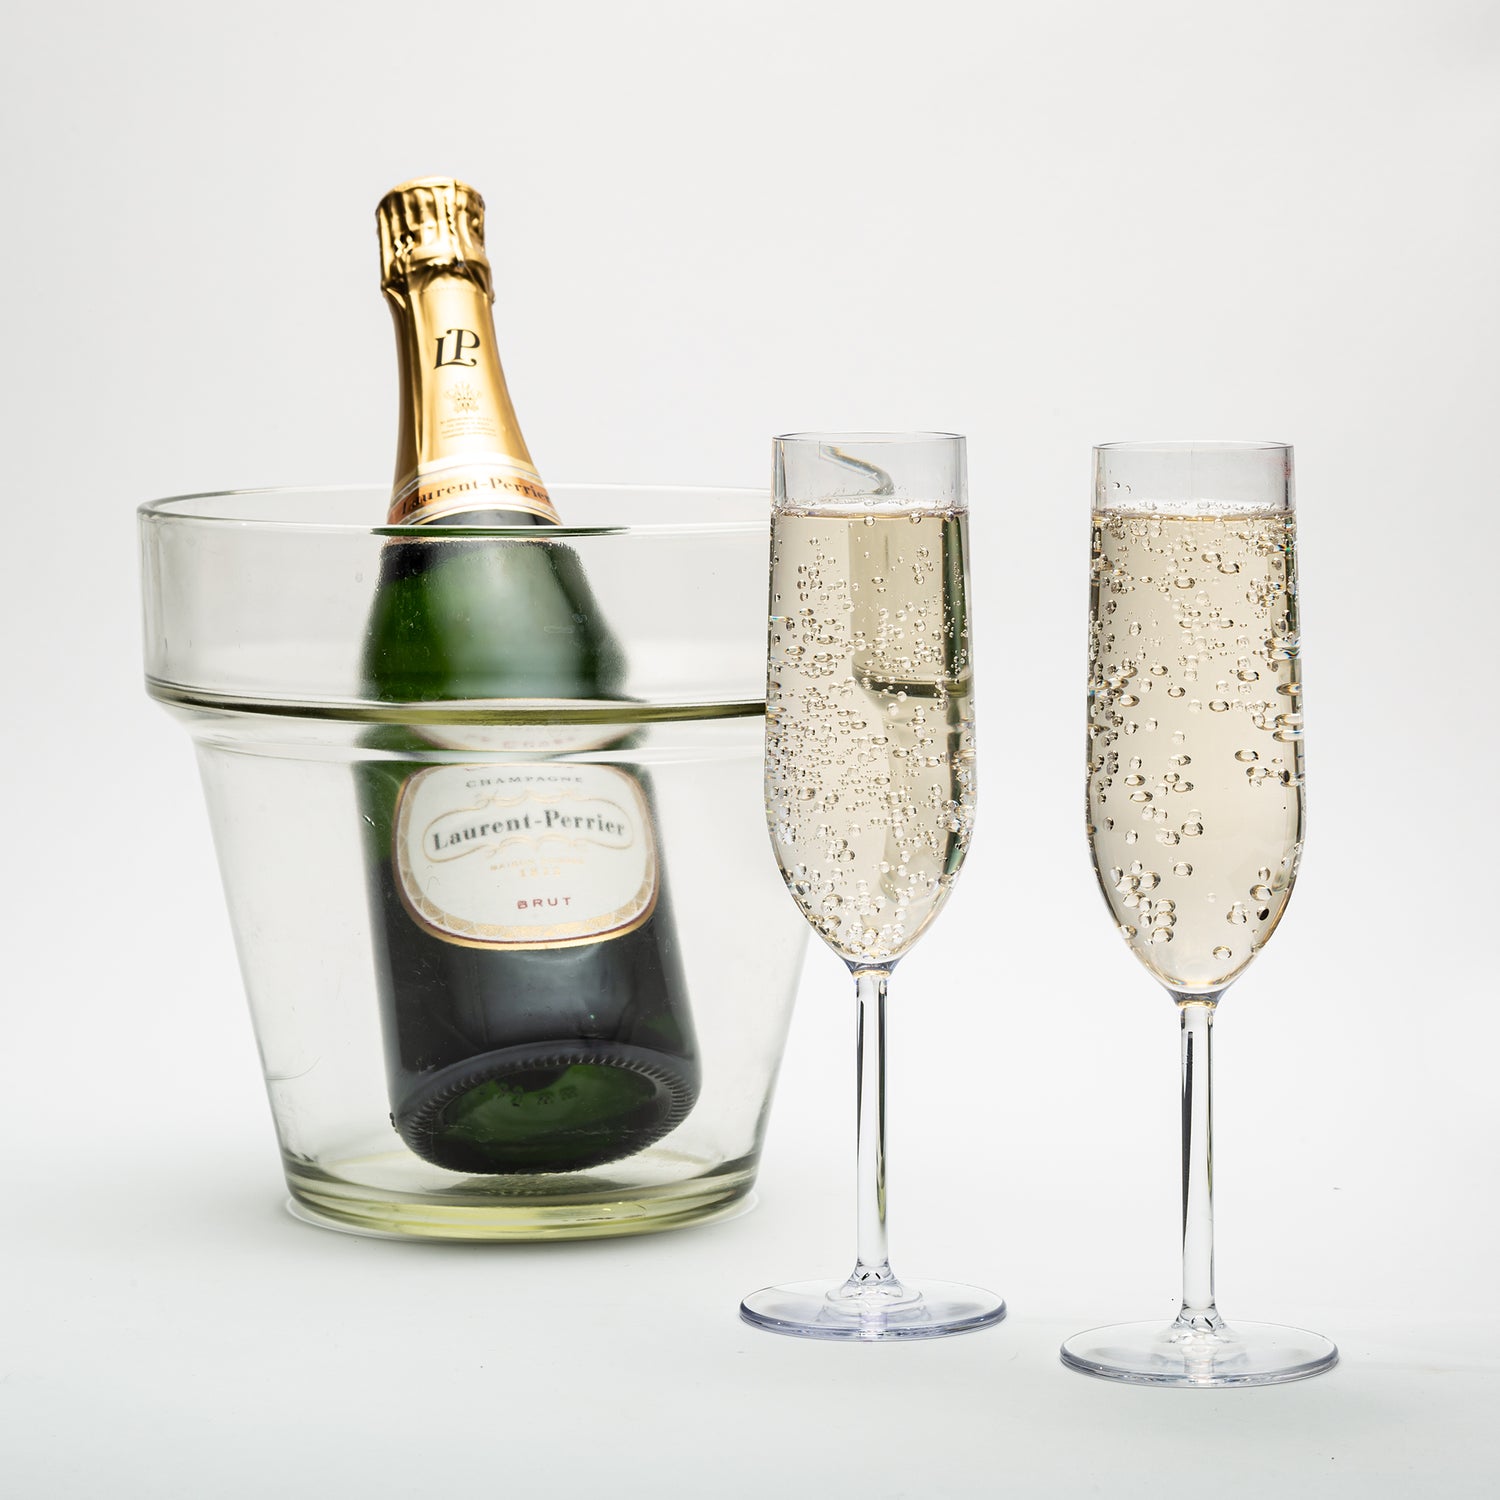 two unbreakable plastic champagne glasses next to a bottle of champagne on ice